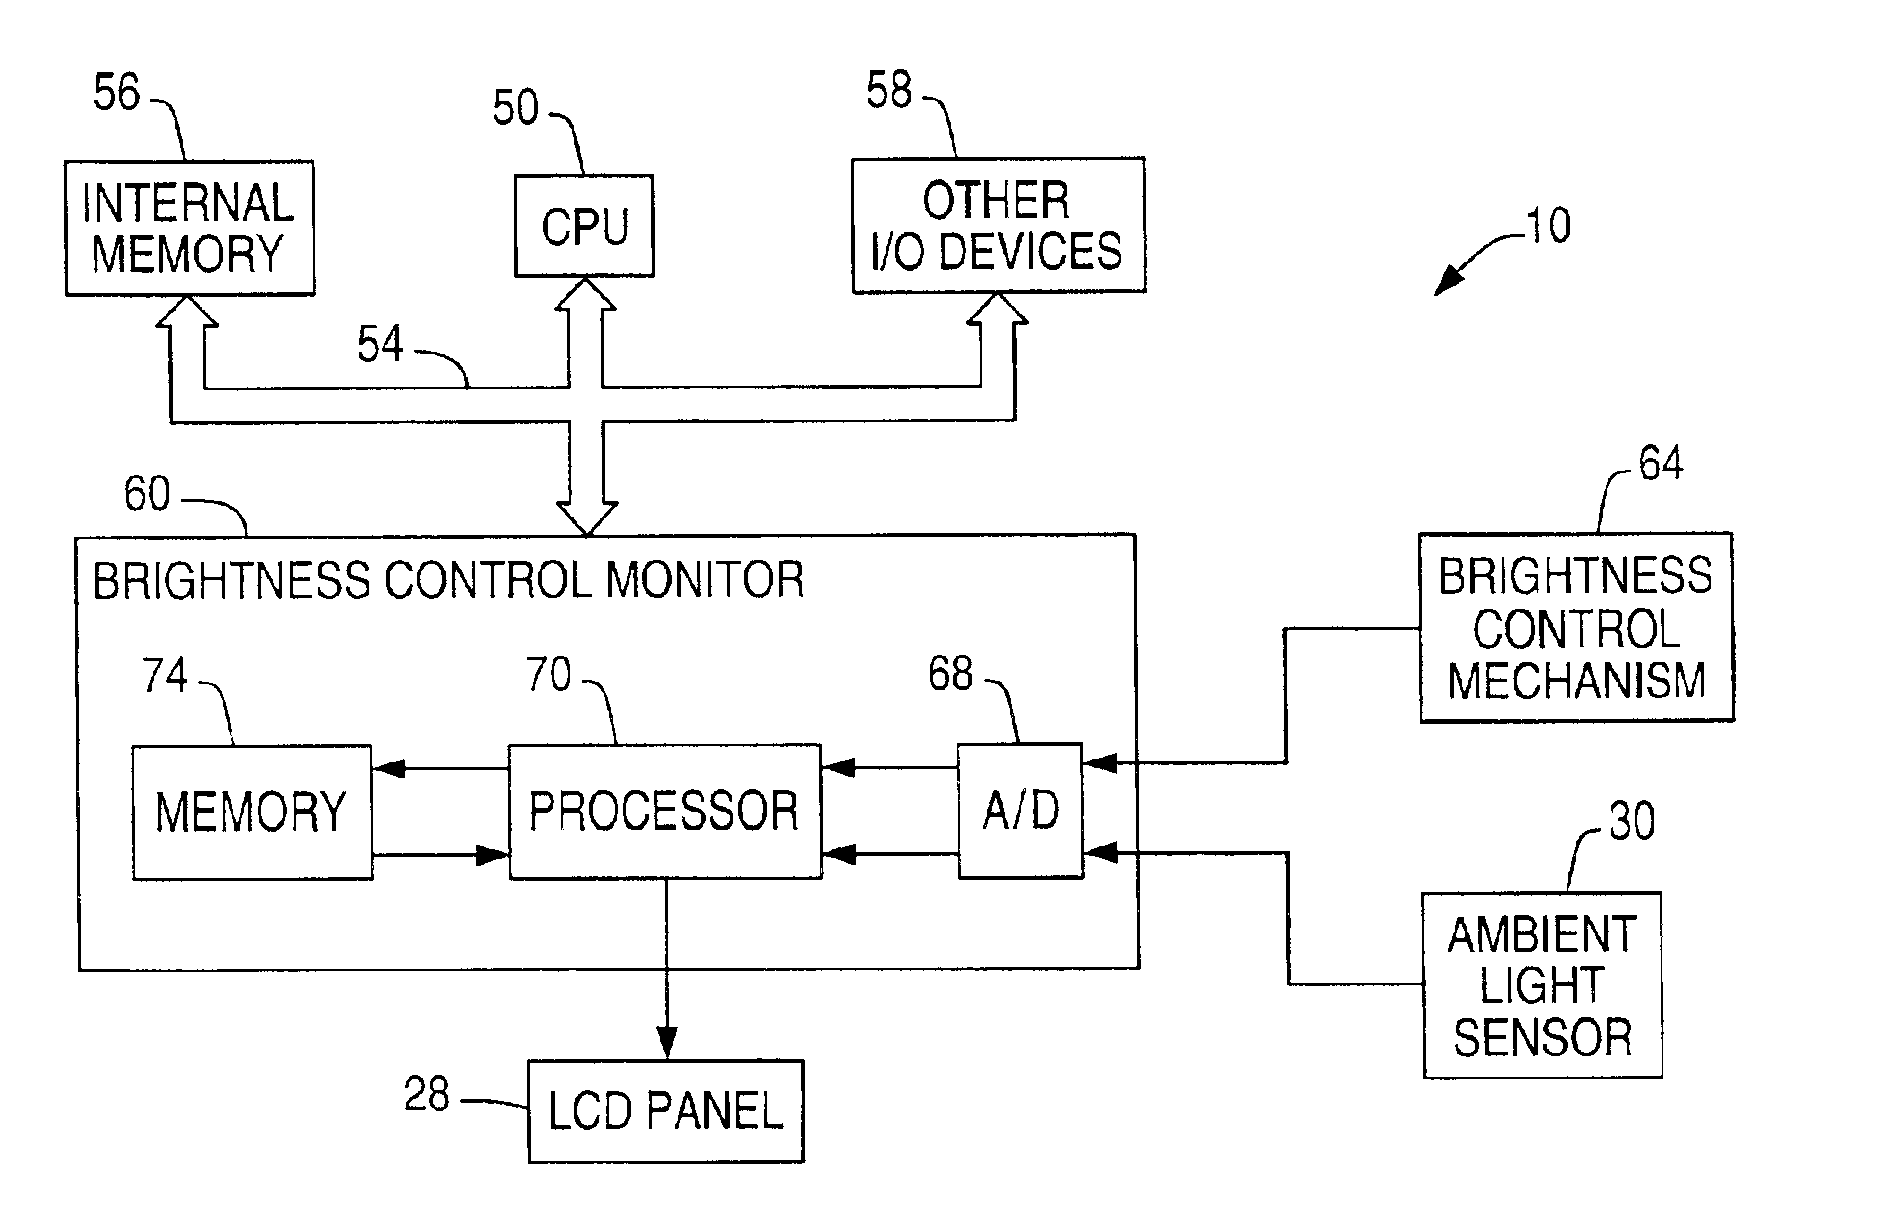 System and method for adjusting display brightness levels according to user preferences